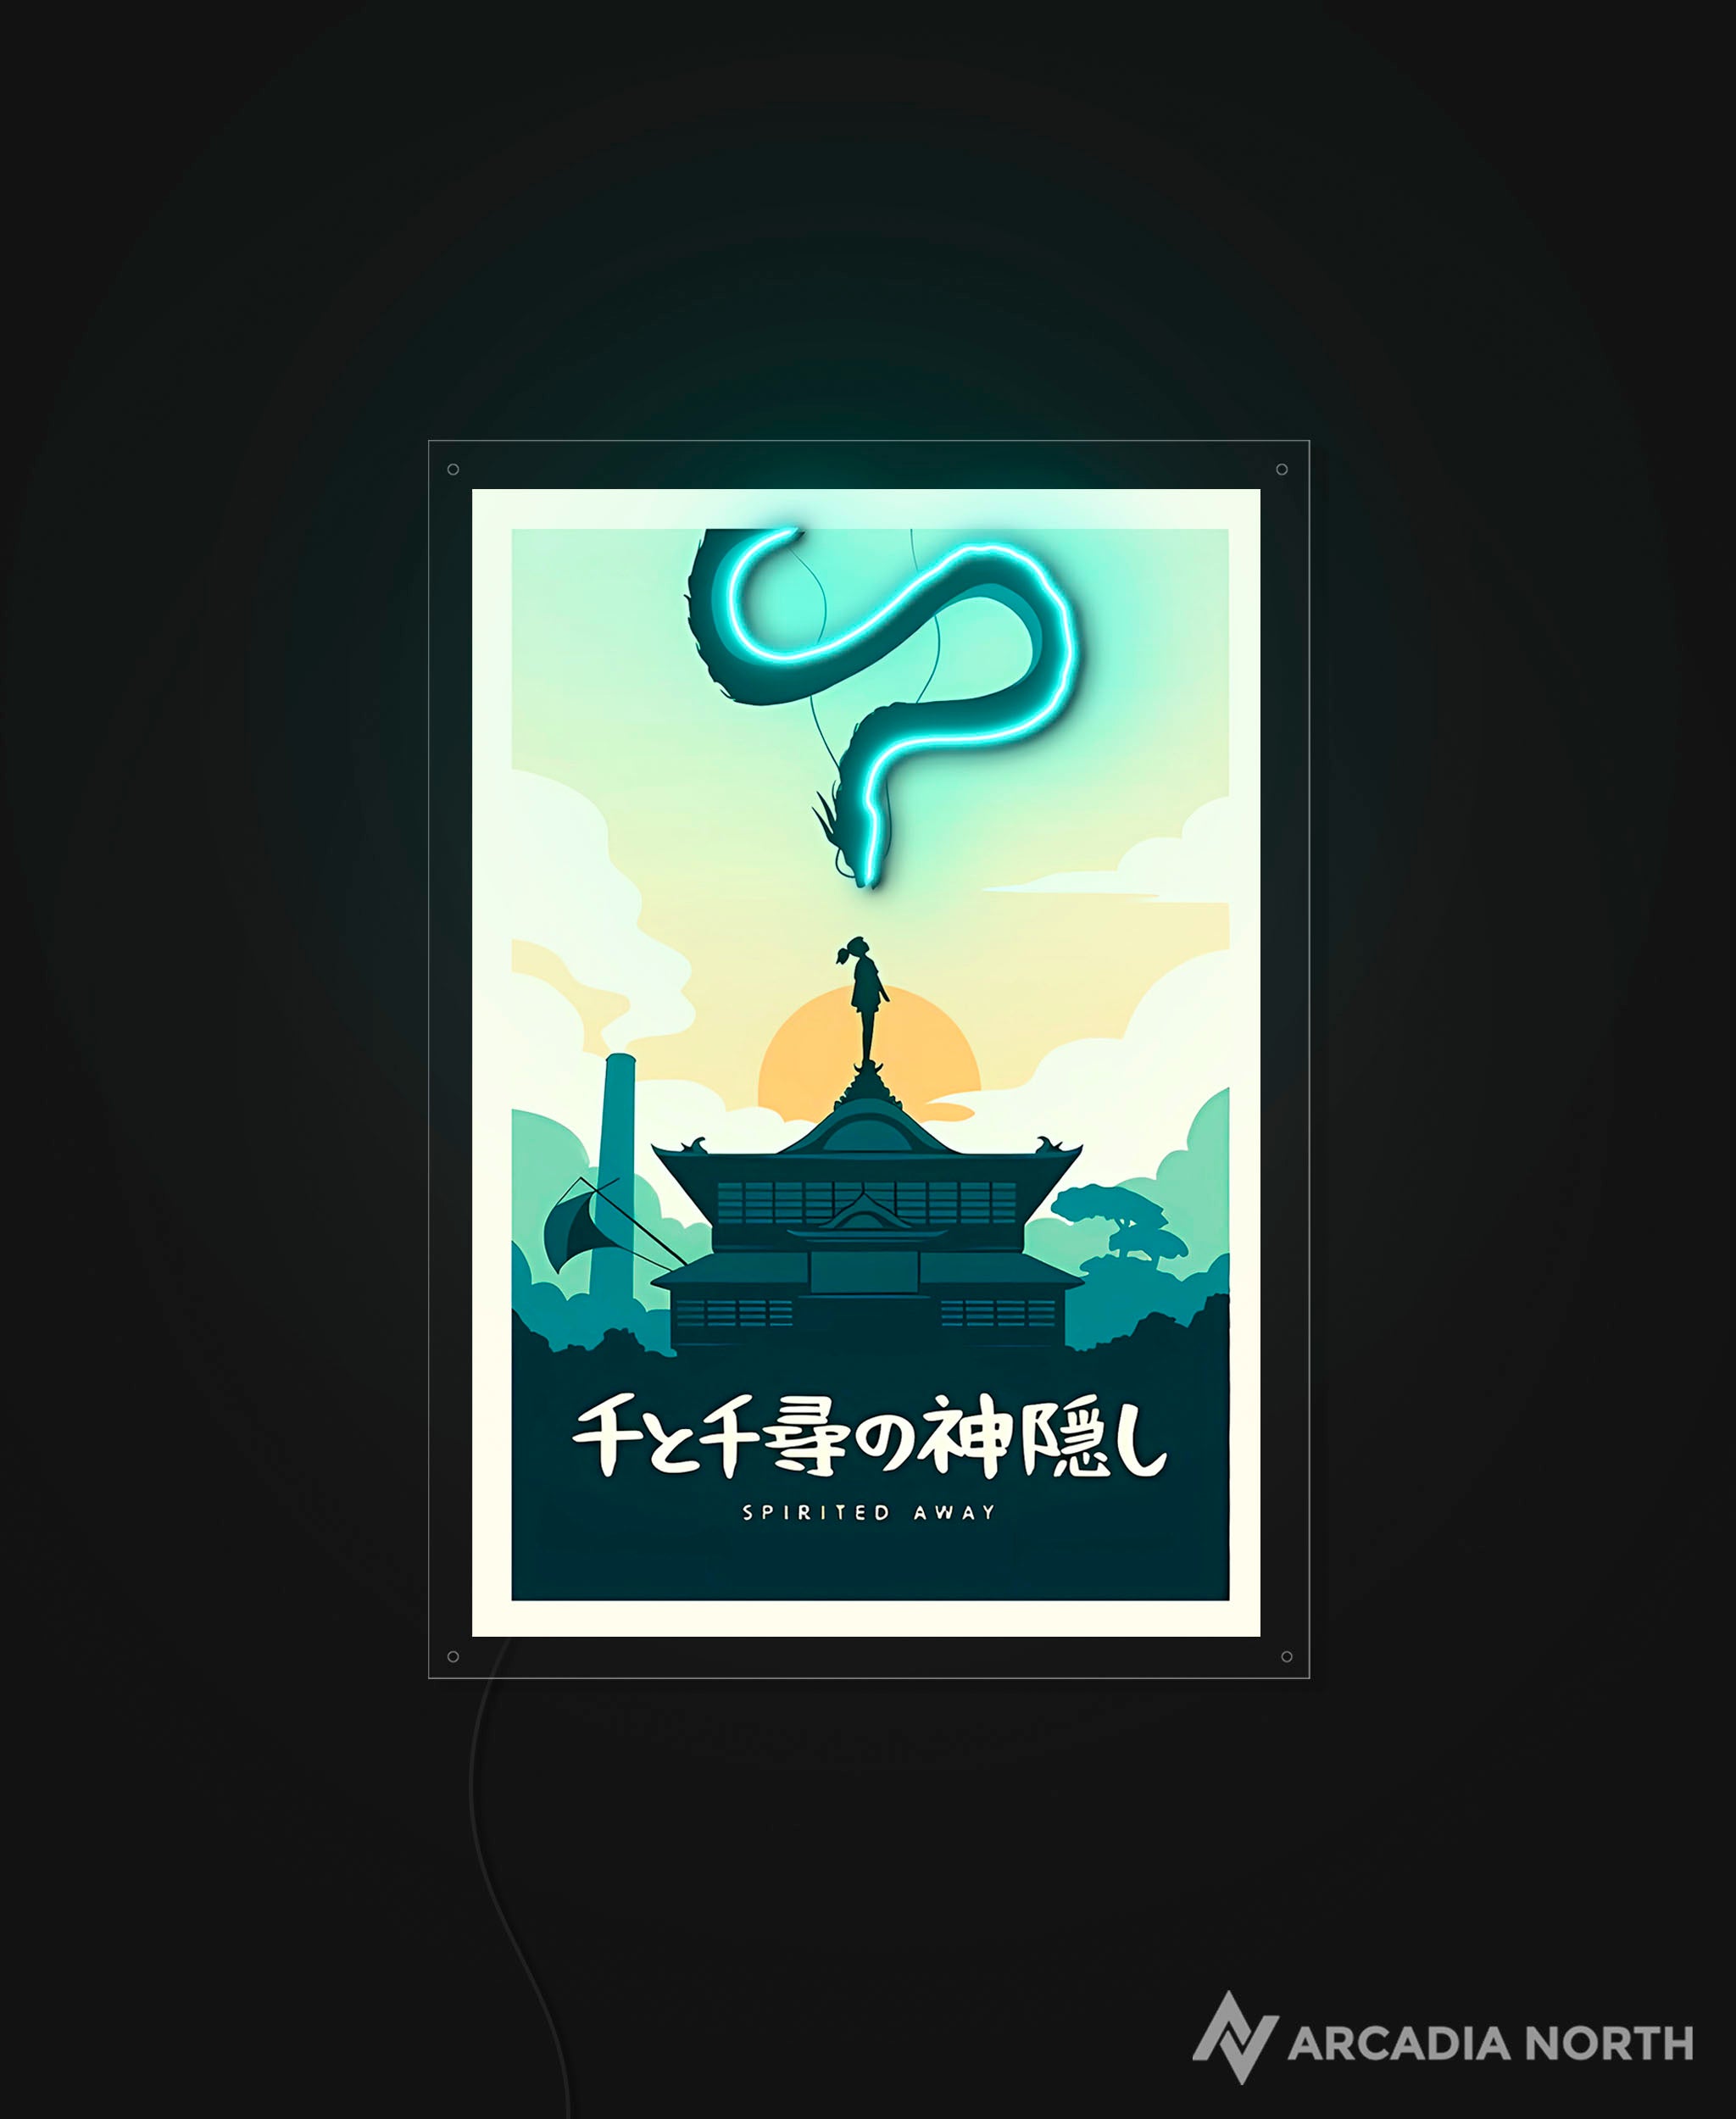 Arcadia North AURALIGHT Original LED Poster featuring the Studio Ghibli anime Spirited Away in minimalistic style. Illuminated by glowing neon LED lights. UV-printed on acrylic.